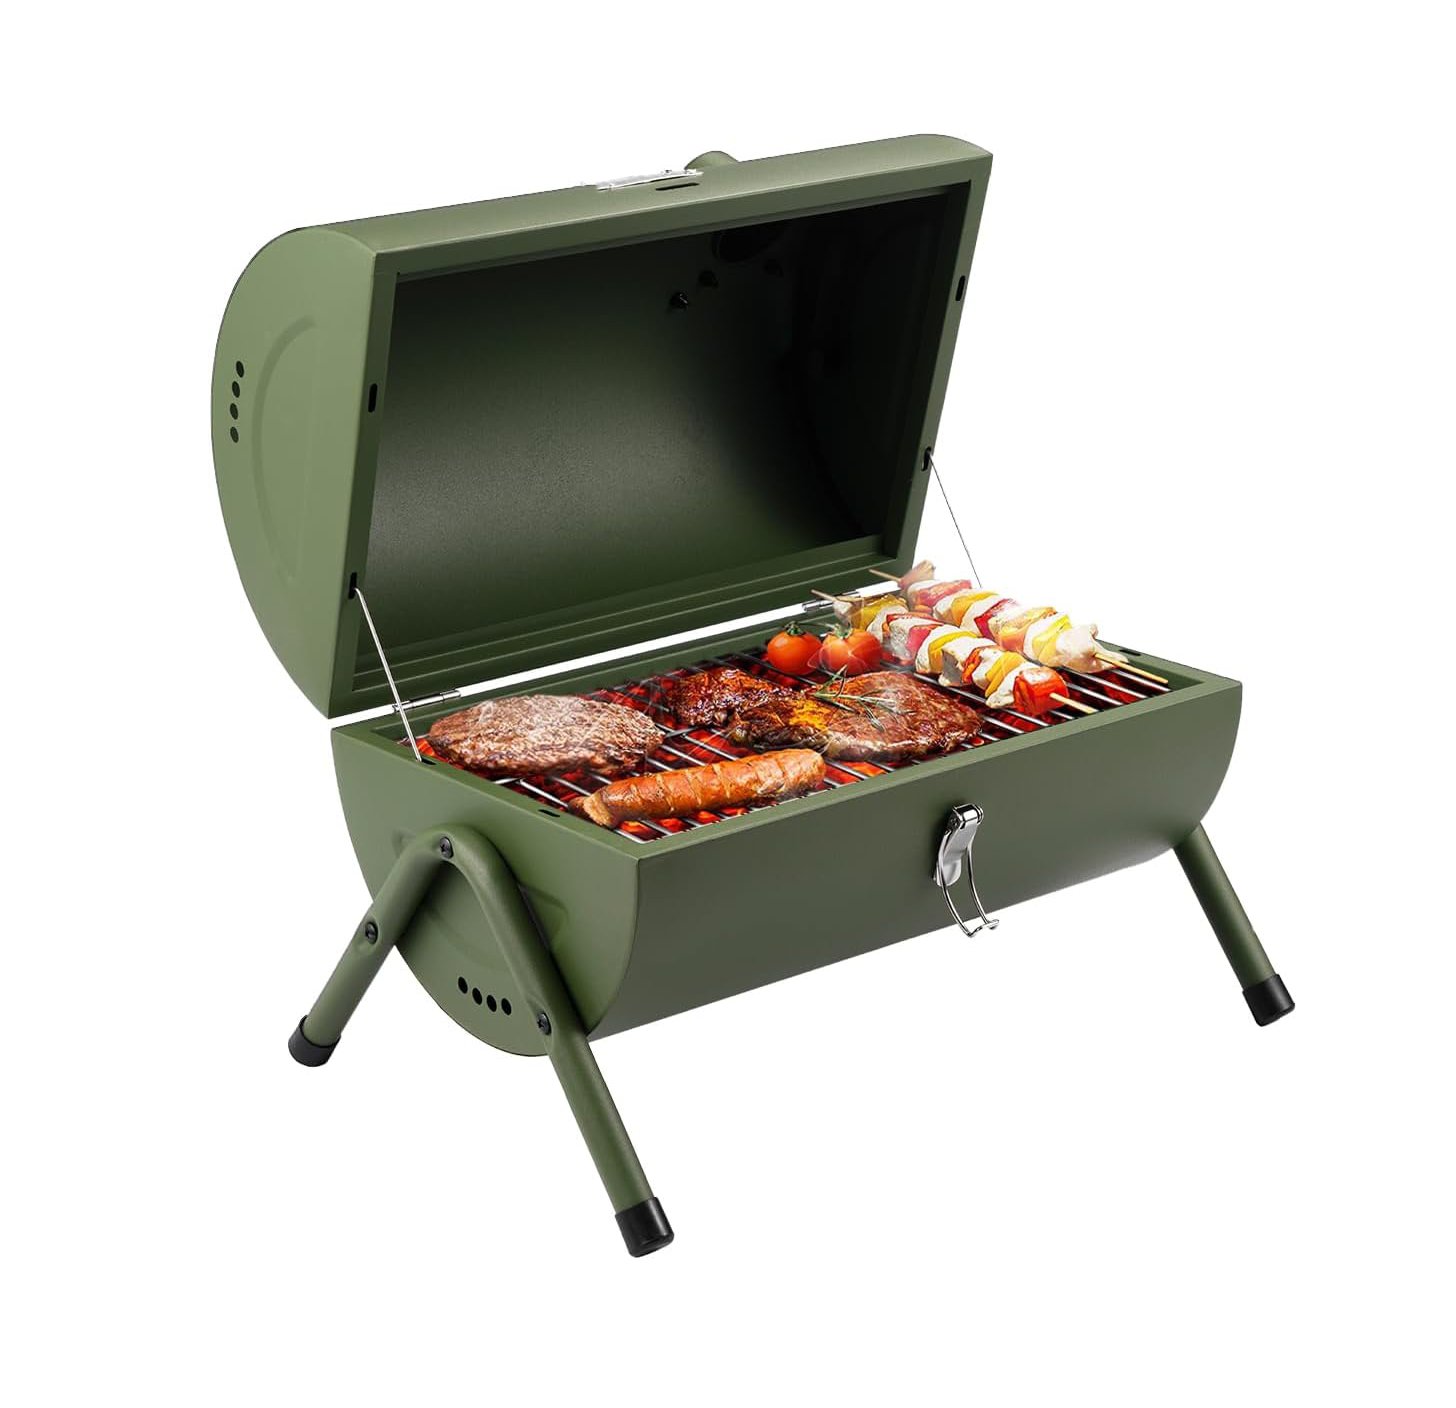 Portable Charcoal Grill, Tabletop Outdoor Barbecue Smoker